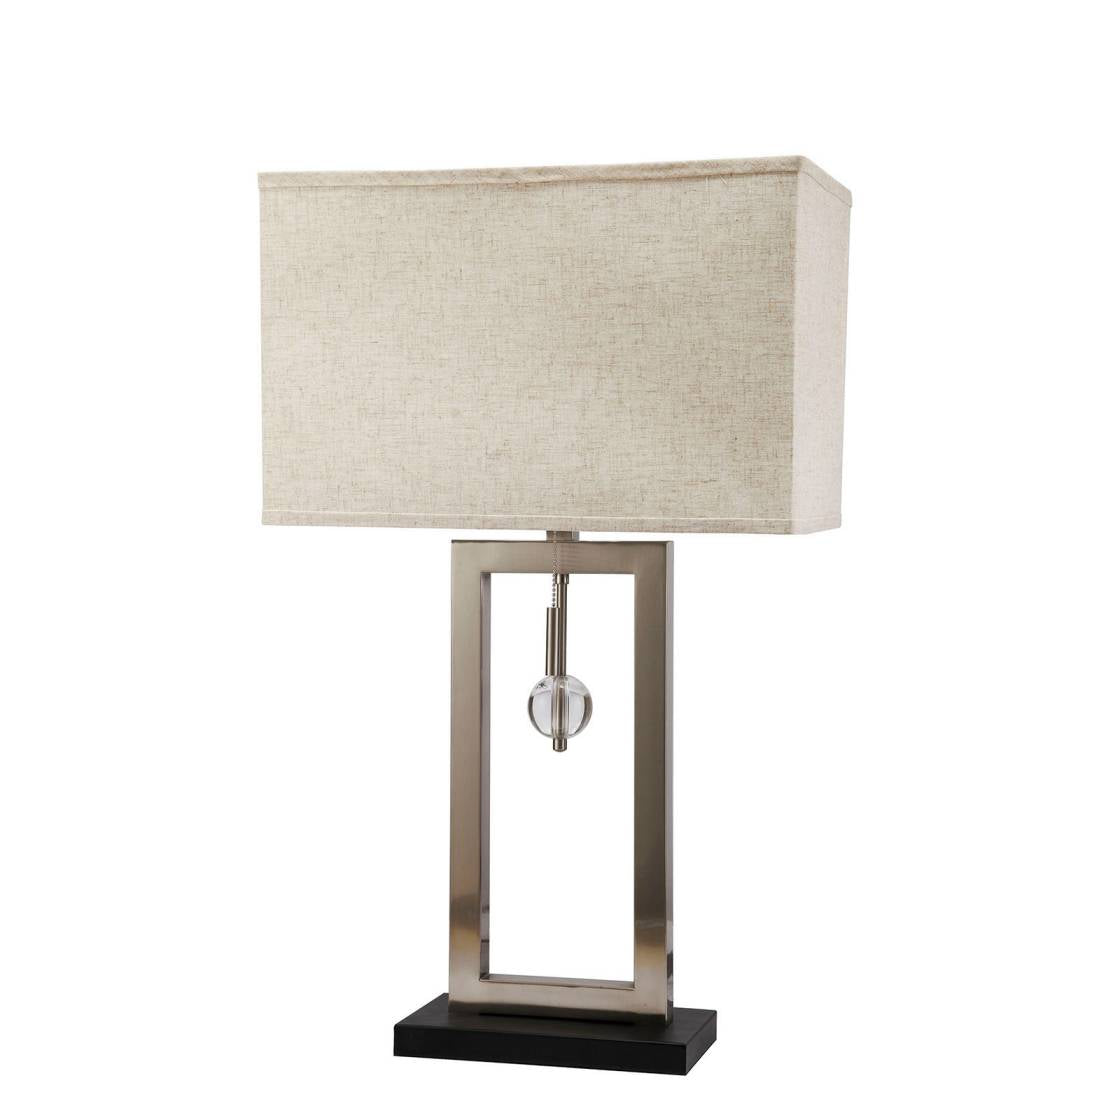 Contemporary Table Lamp With Rectangular Frame Base, Silver And Black By Benzara